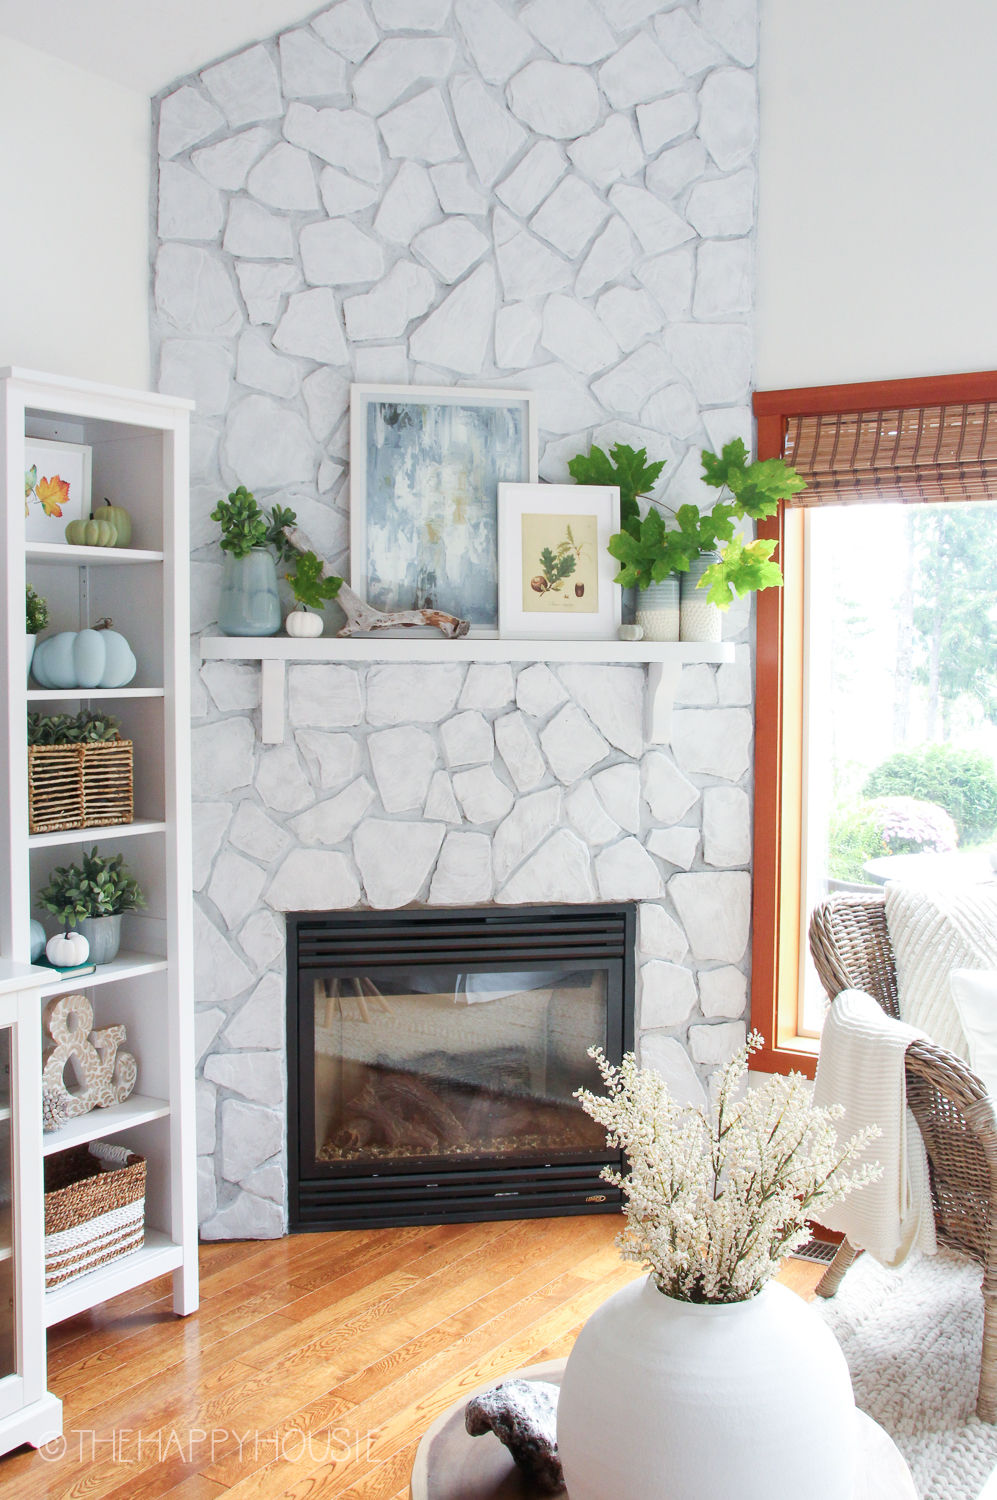 Open shelves with fall decor are beside the fireplace mantel.